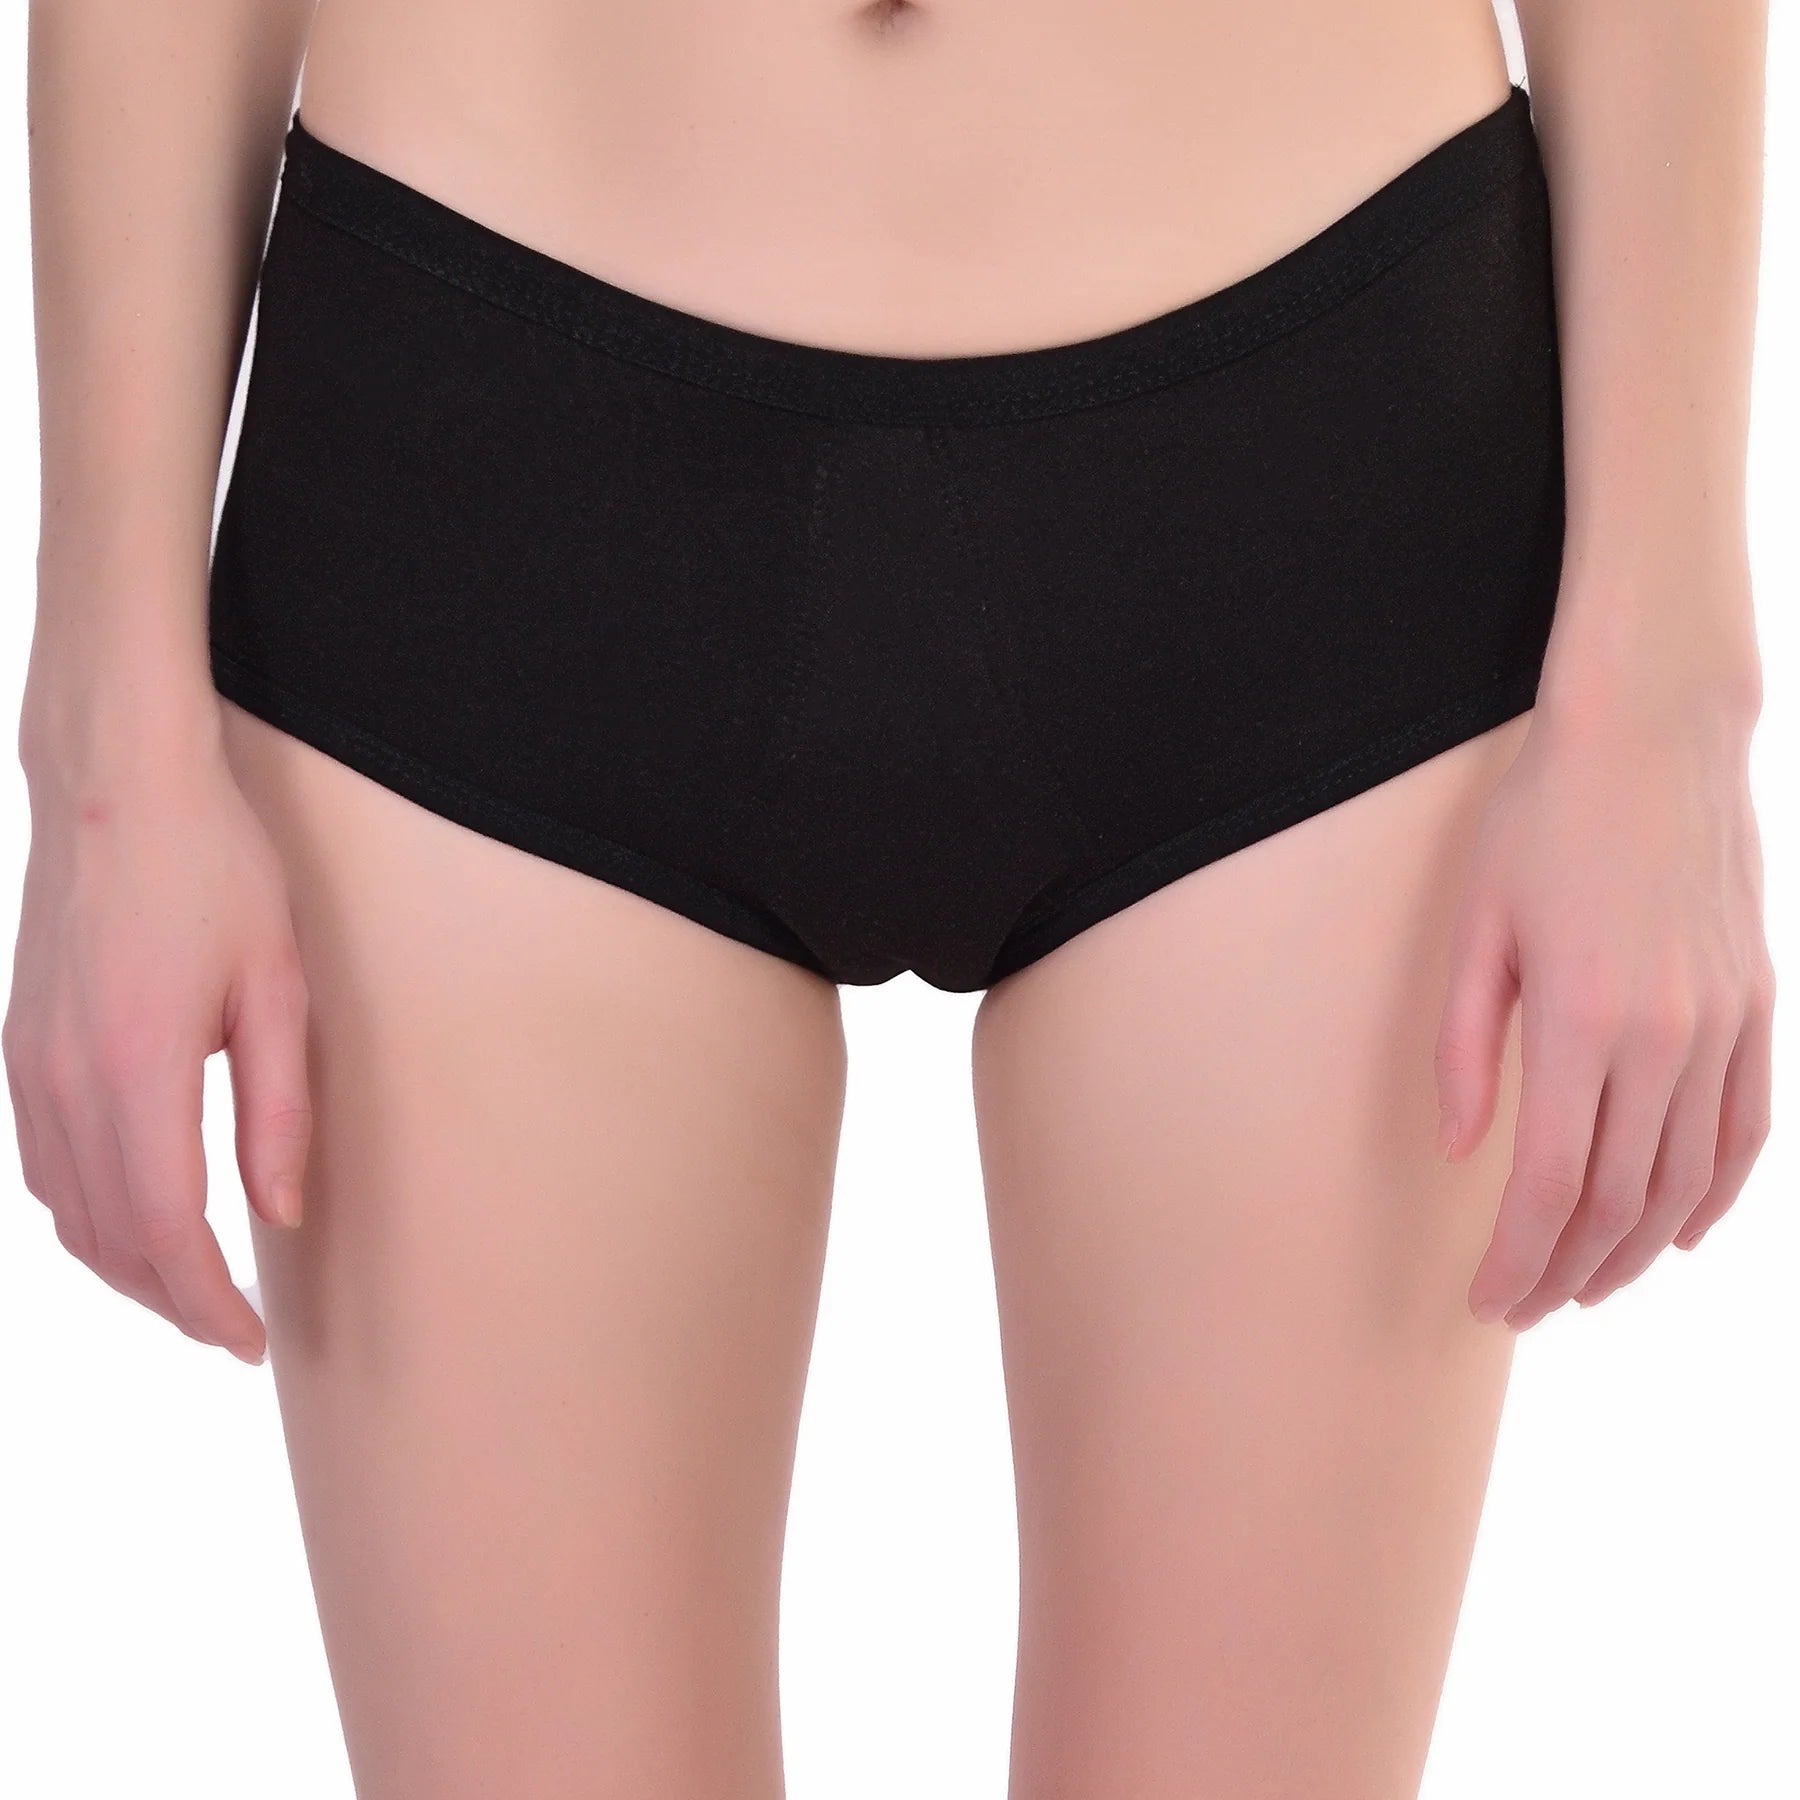 How many girls wear guy silk boxers, and would you wear them as underwear  or sleepwear? - Quora